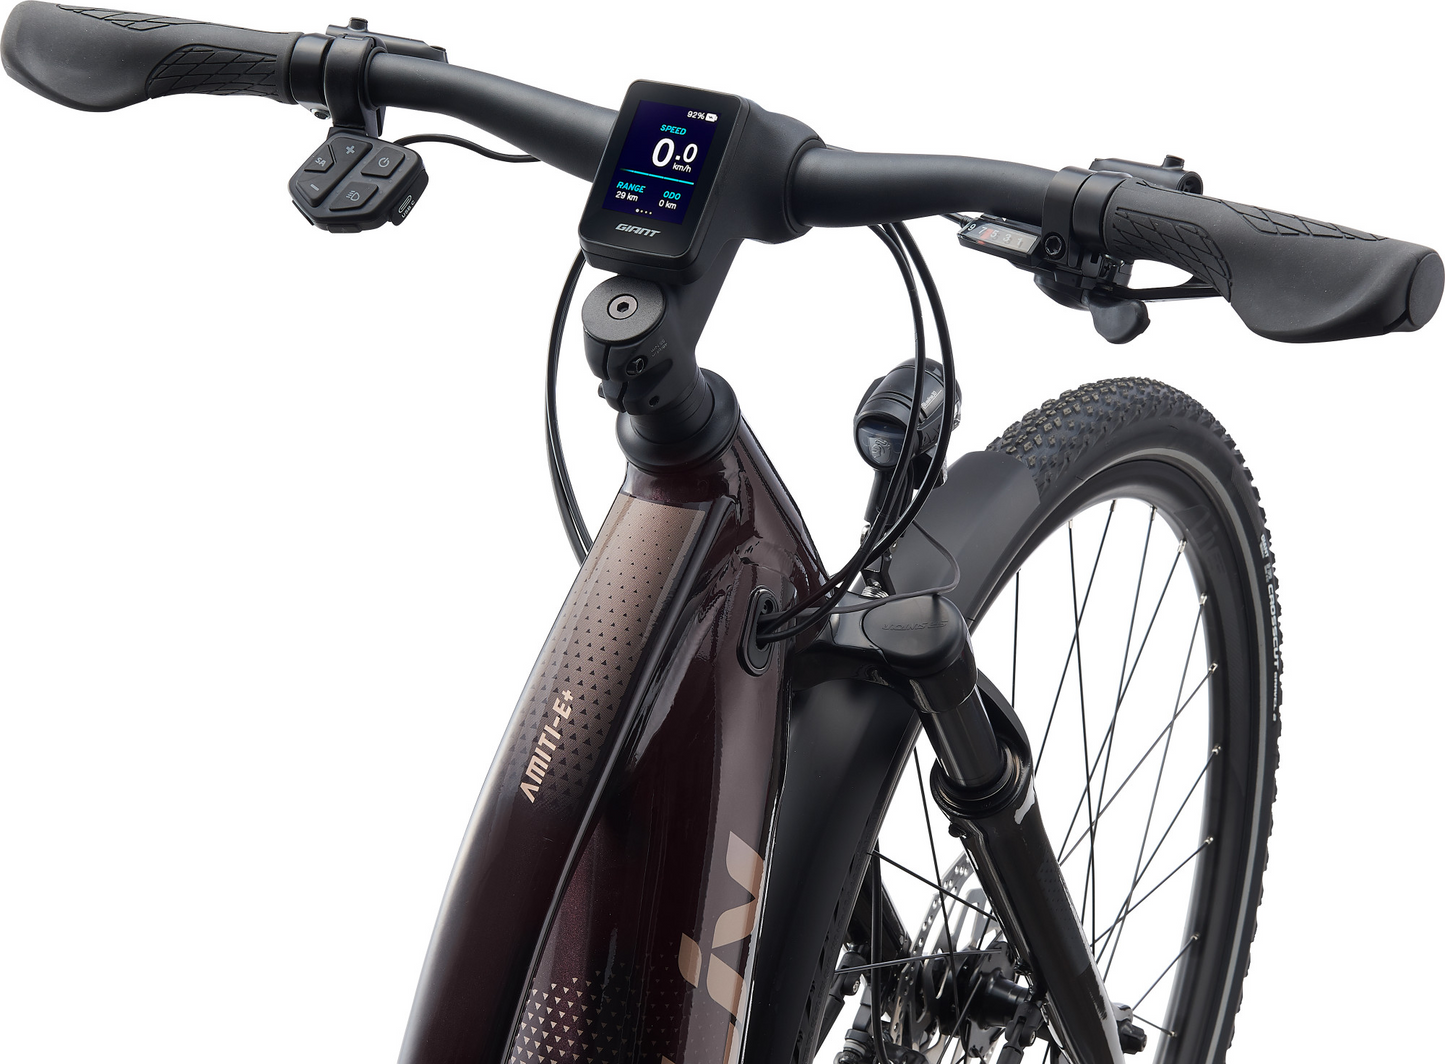 The handlebar of the LIV-AMITI-E+ 2 electric bike with an electronic display and a powerful motor.